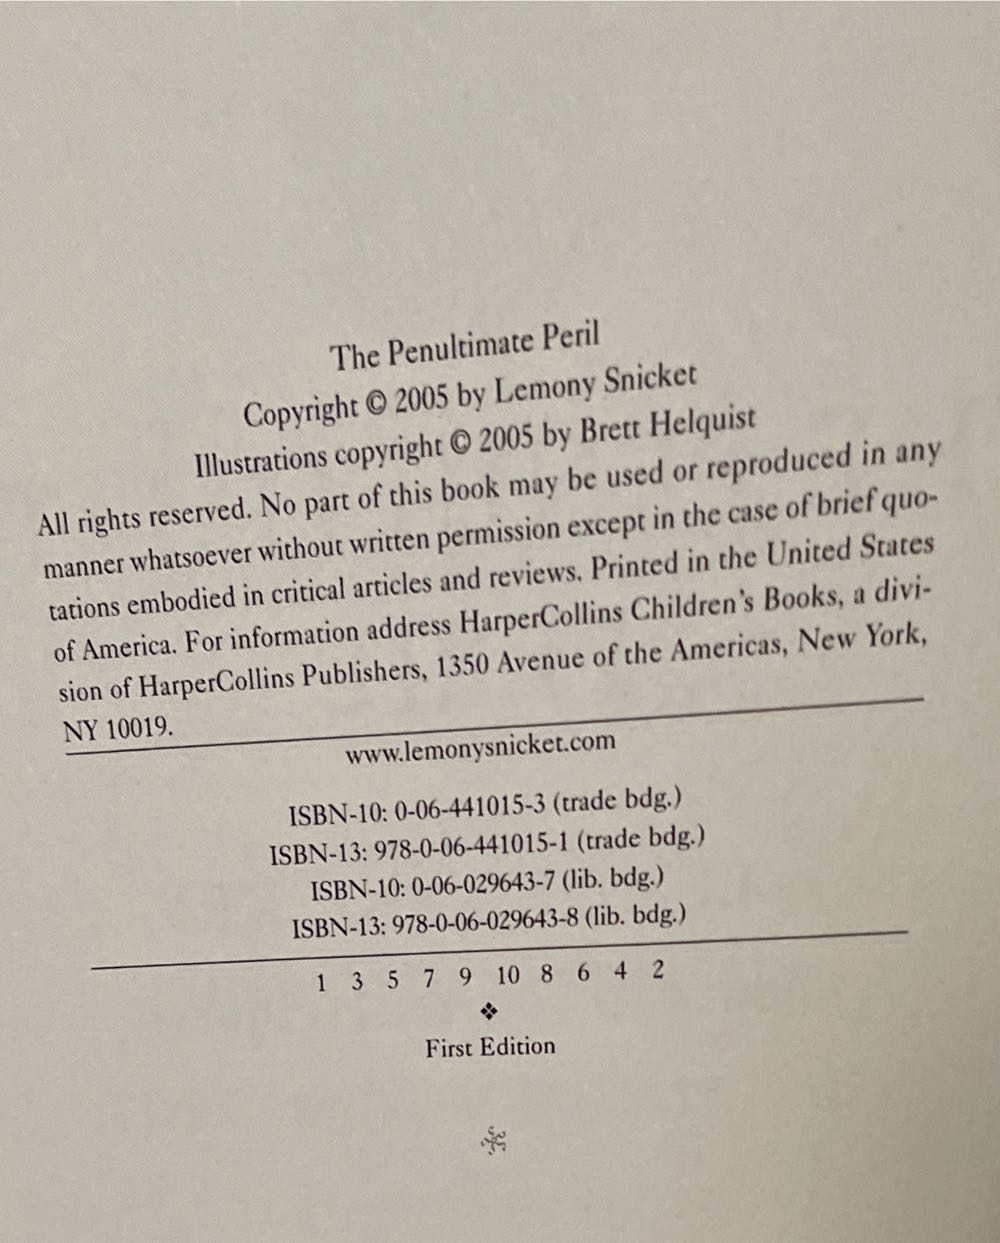 A Series Of Unfortunate Events: The Penultimate Peril - Lemony Snicket (- Hardcover) book collectible [Barcode 9780064410151] - Main Image 3